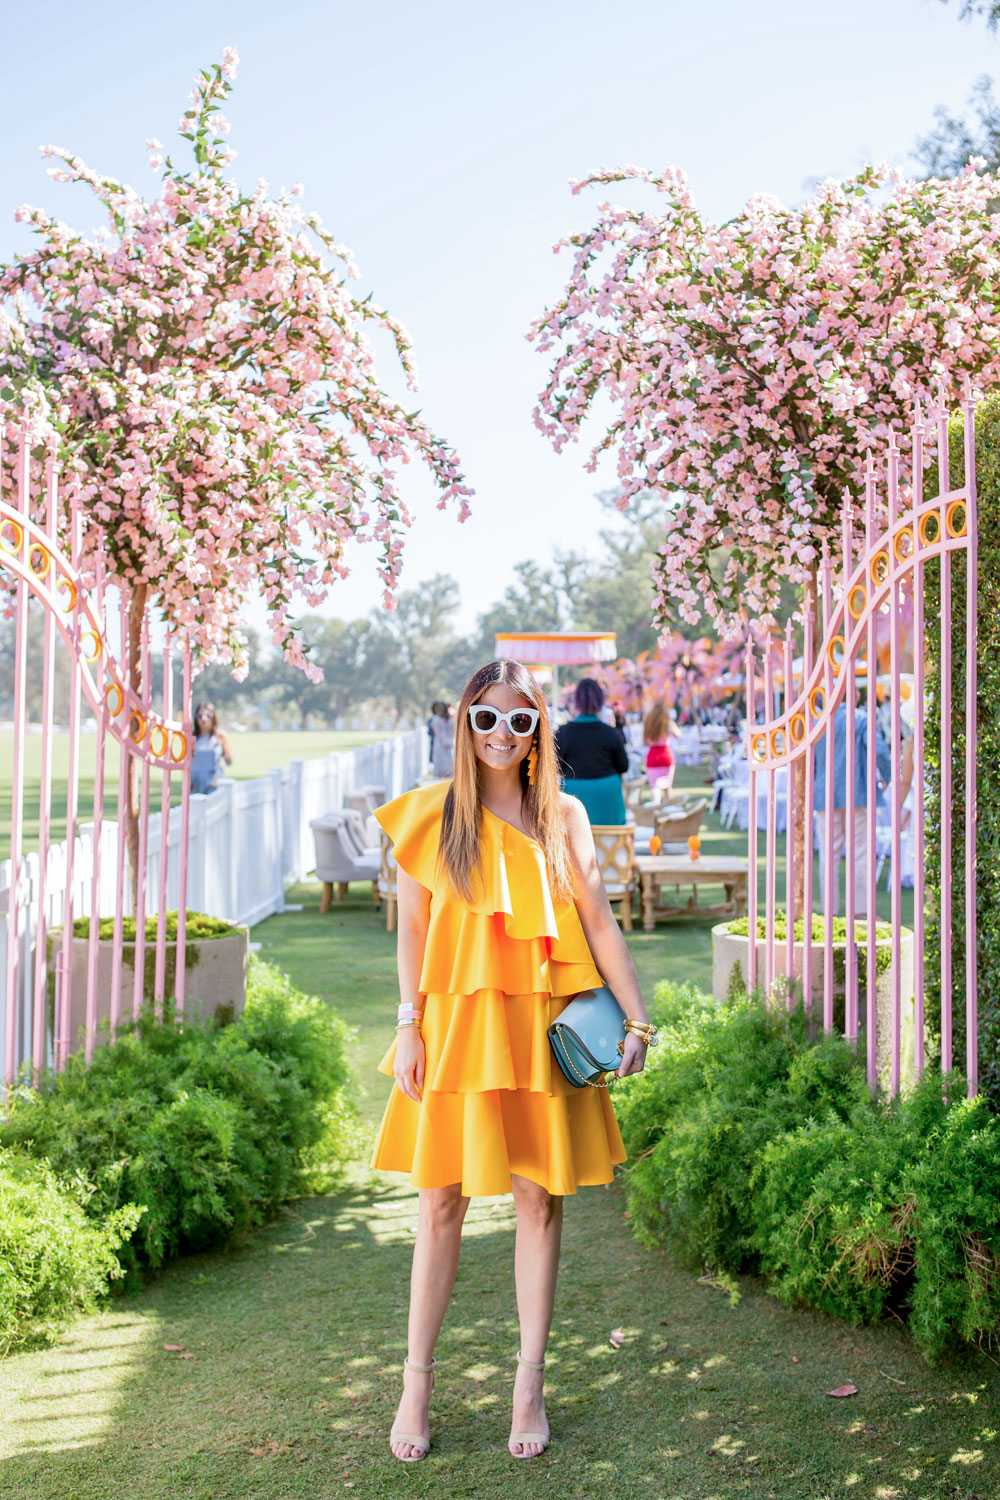 A Beautiful Weekend for the Veuve Clicquot Polo Classic - Pretty